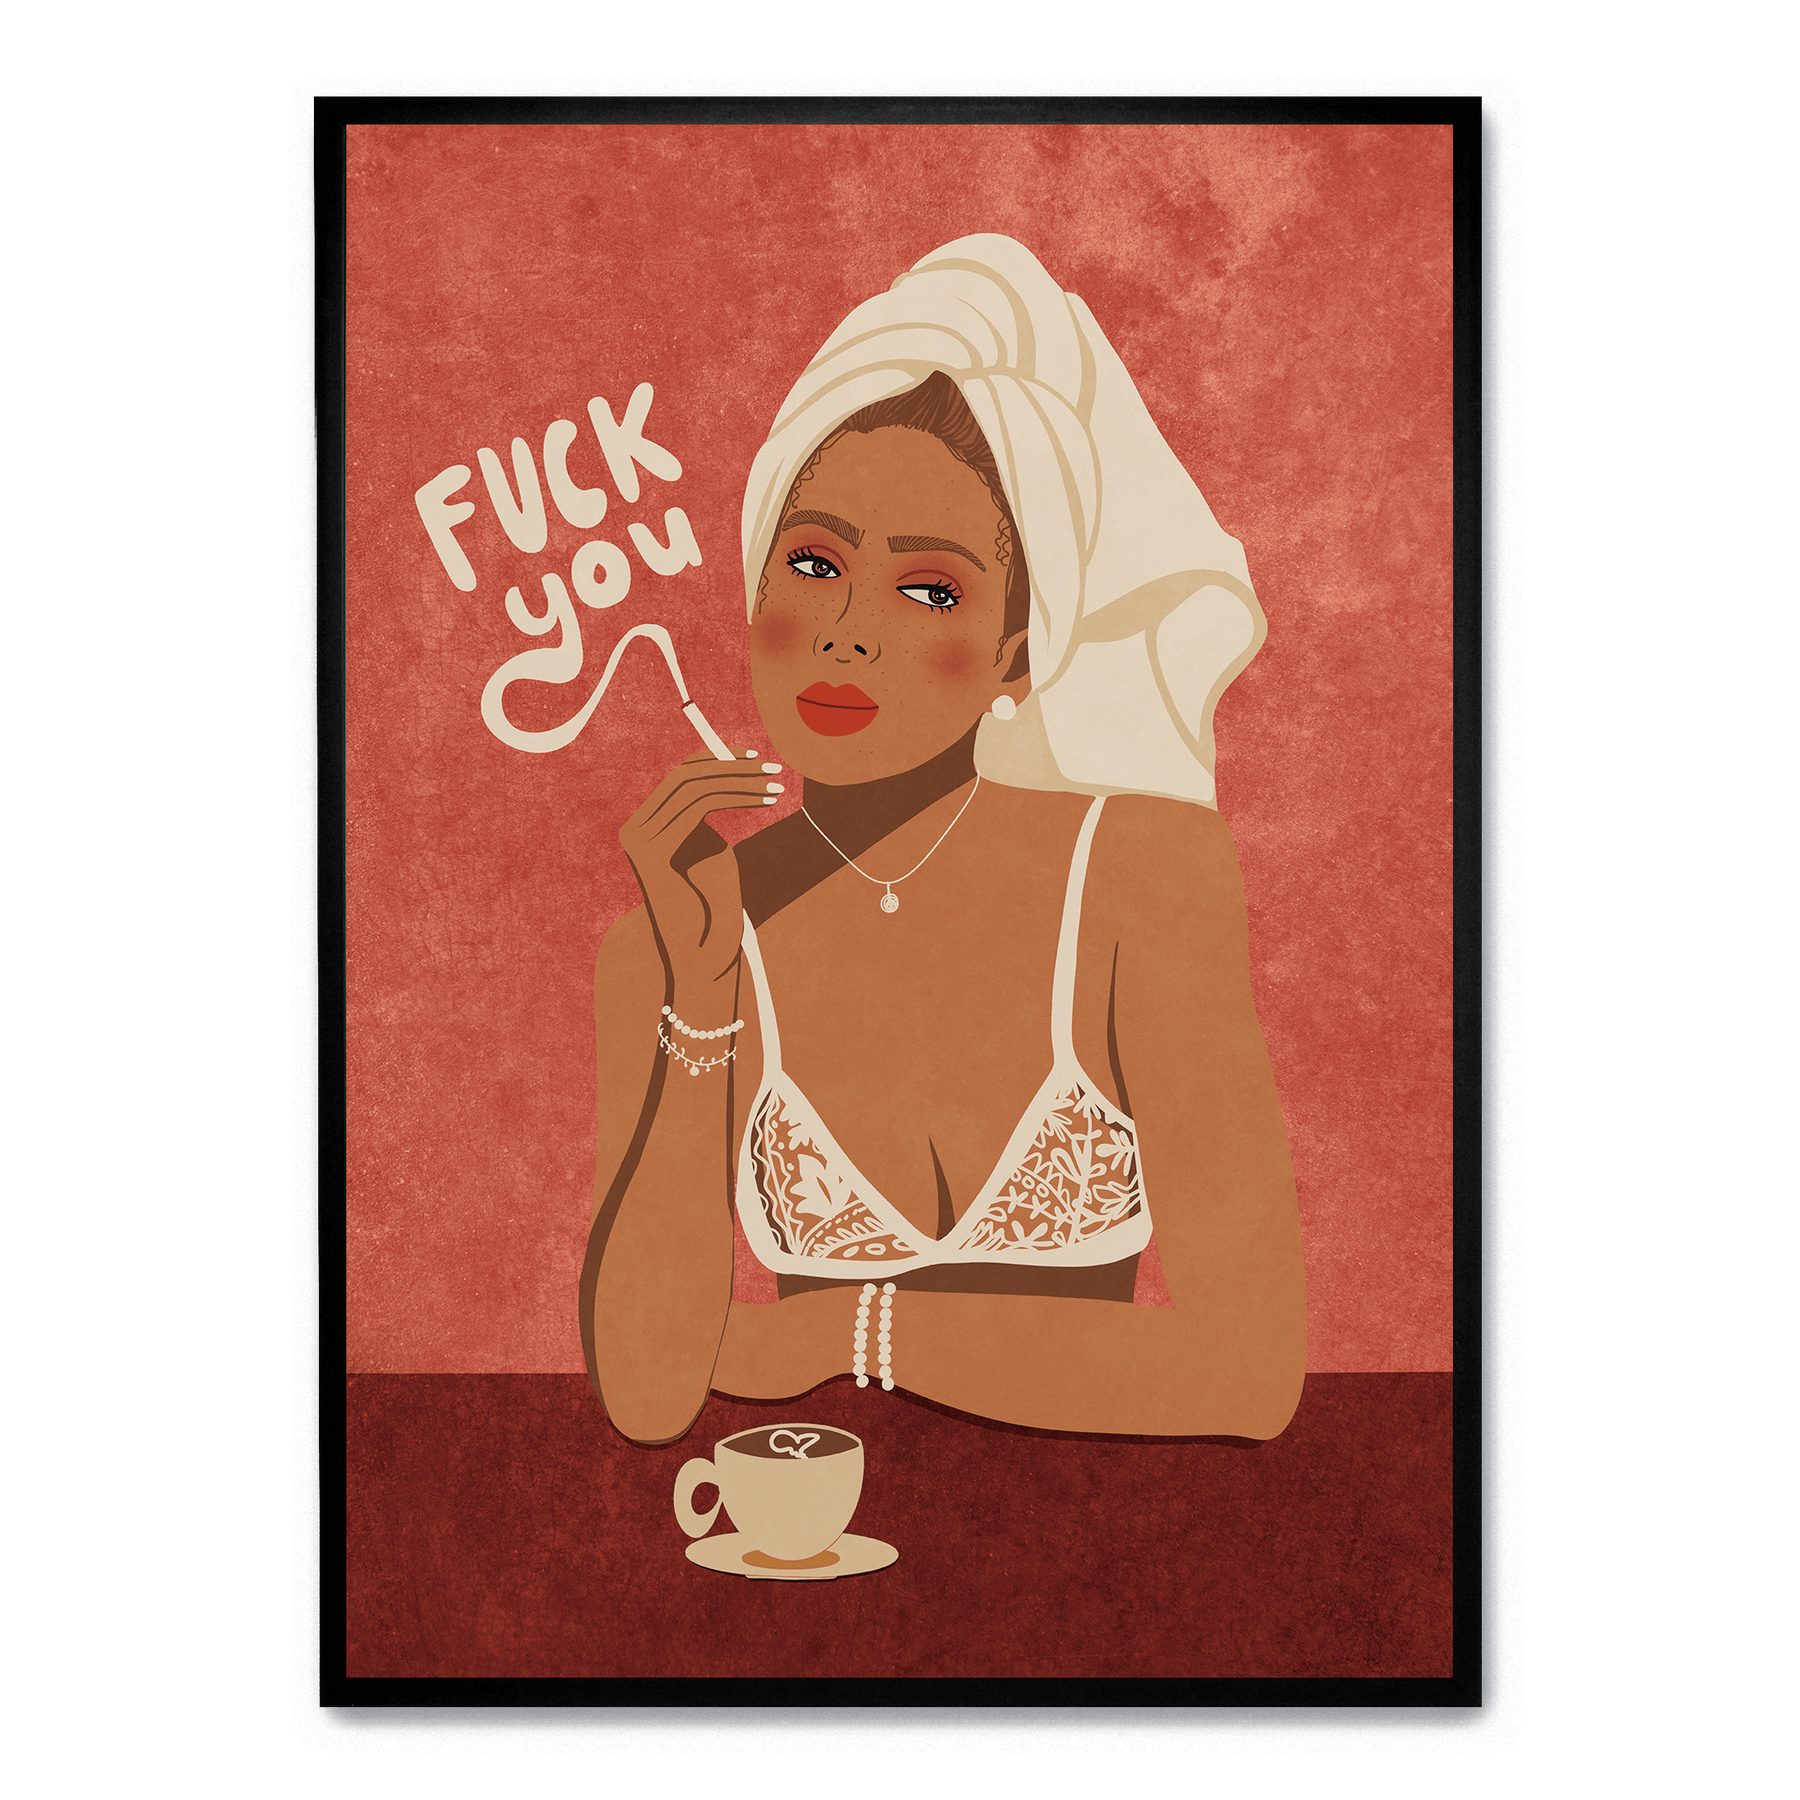 Fuck You poster